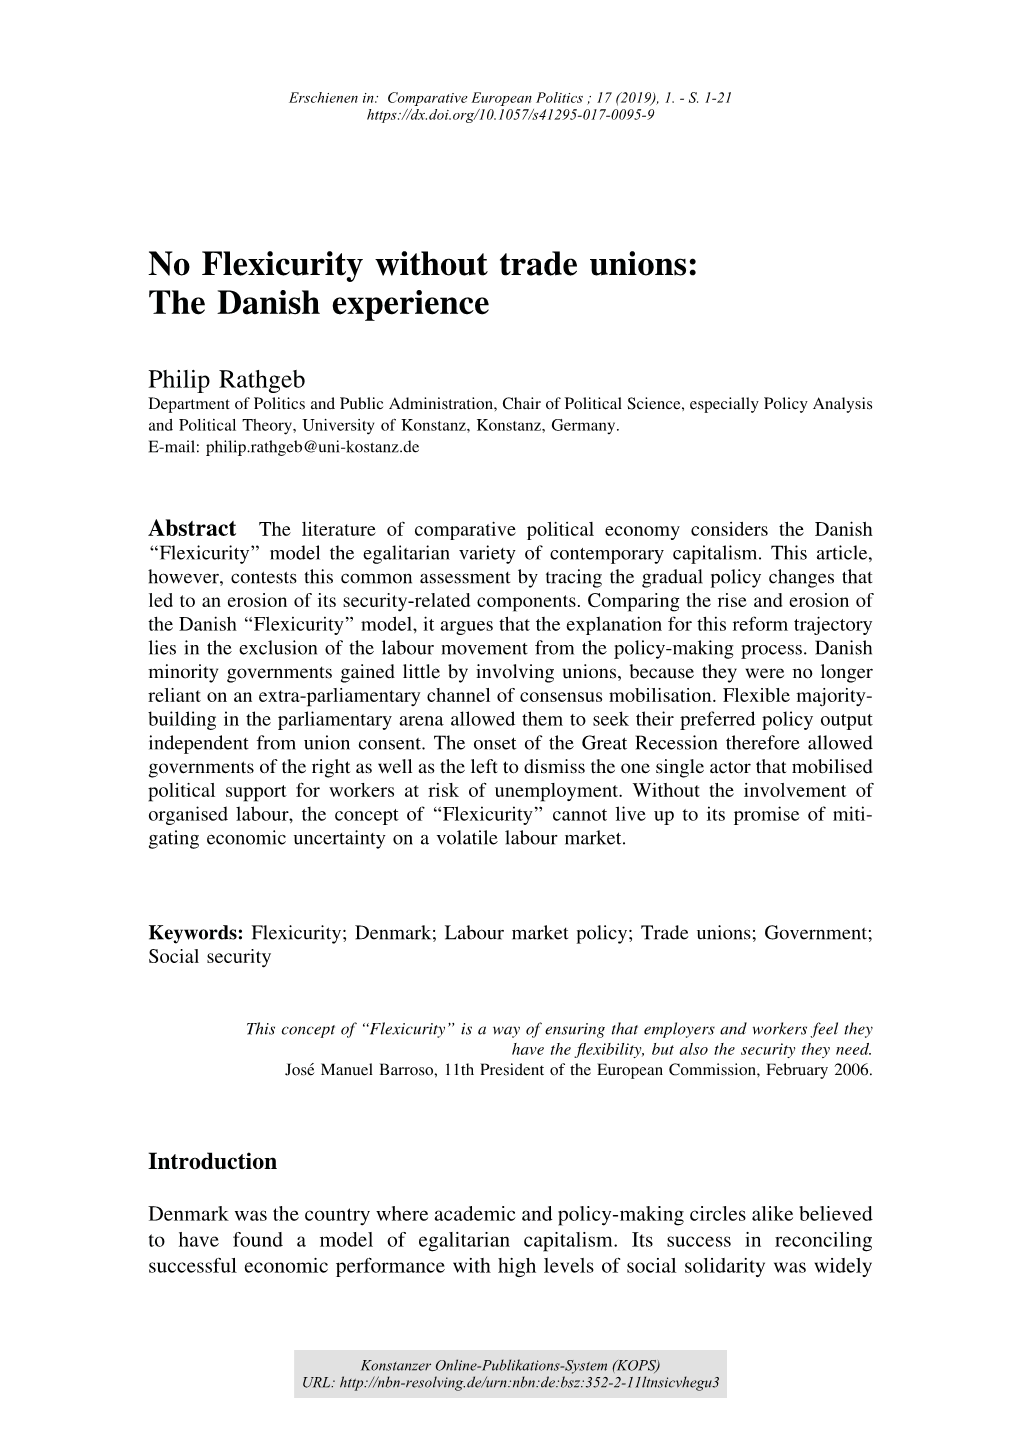 No Flexicurity Without Trade Unions : the Danish Experience